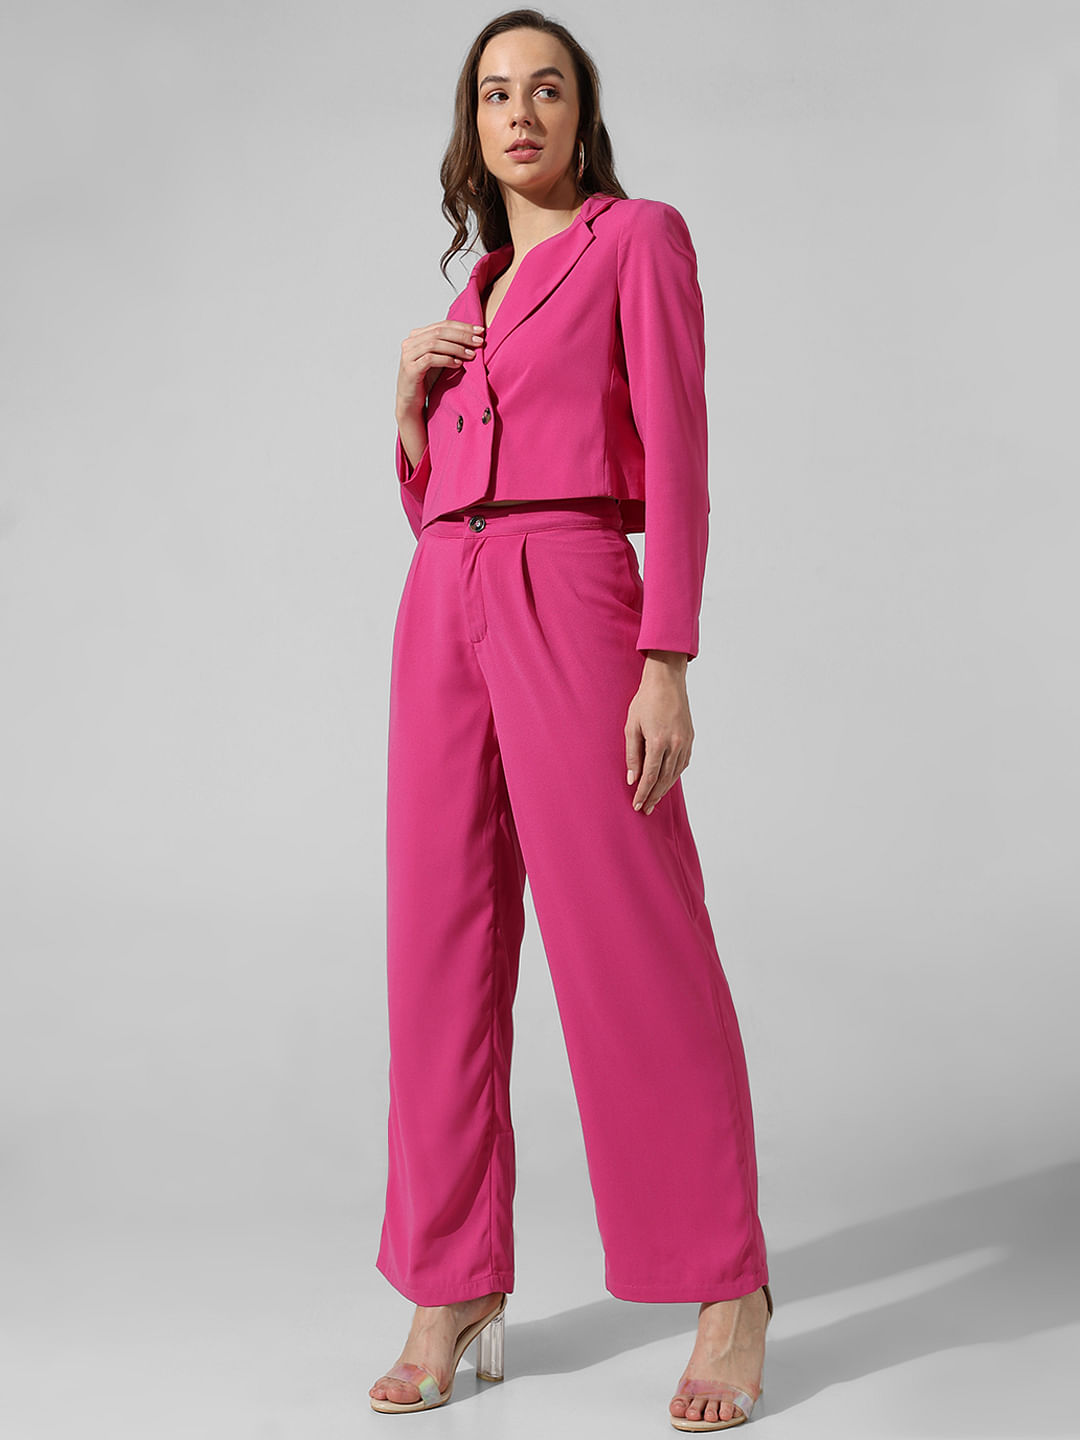 Loose Blazer Suit For Women Perfect For Summer Street Fashion, Prom, Party,  And Weddings Ladies Summer Jackets And Pants Included From Greatvip, $62.74  | DHgate.Com